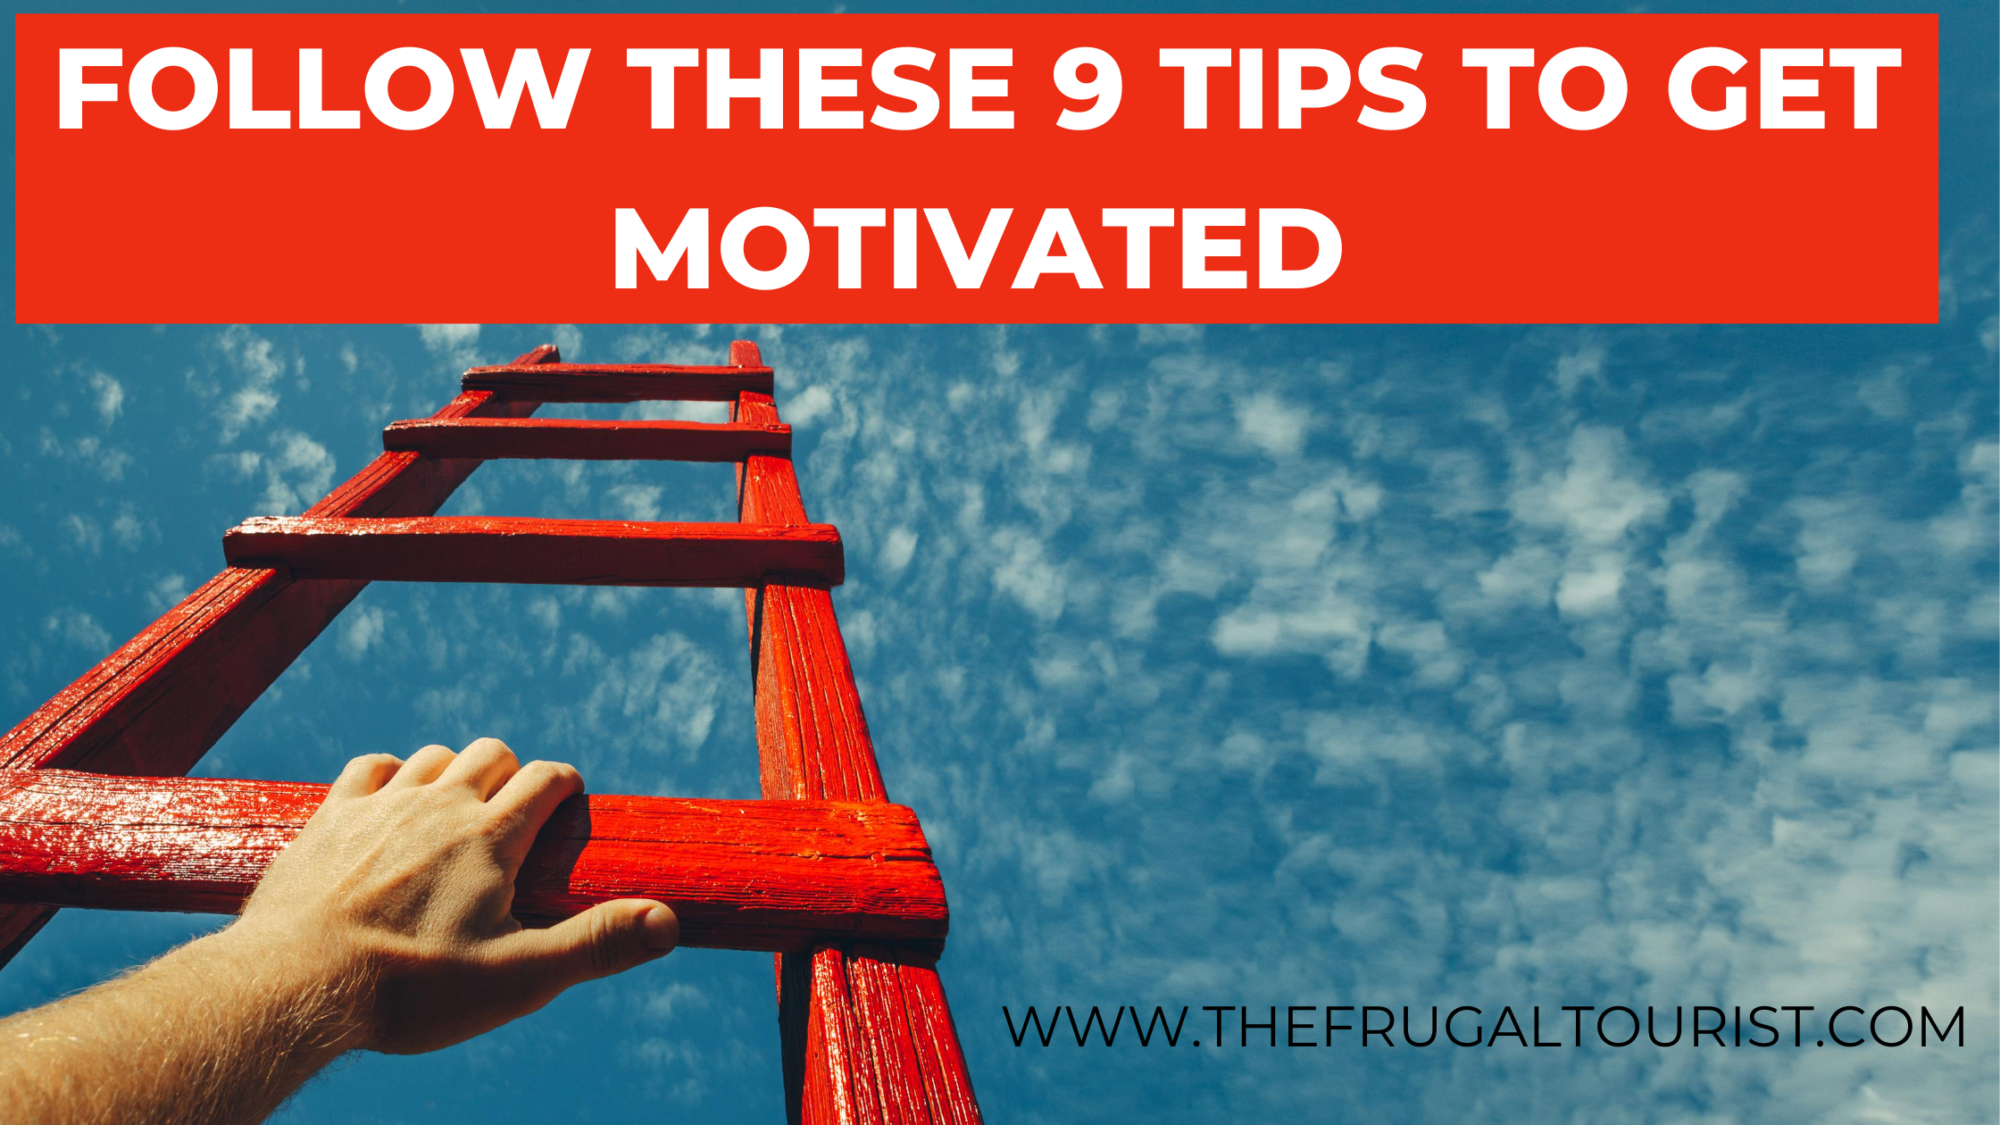 Follow These 9 Tips to Get Motivated